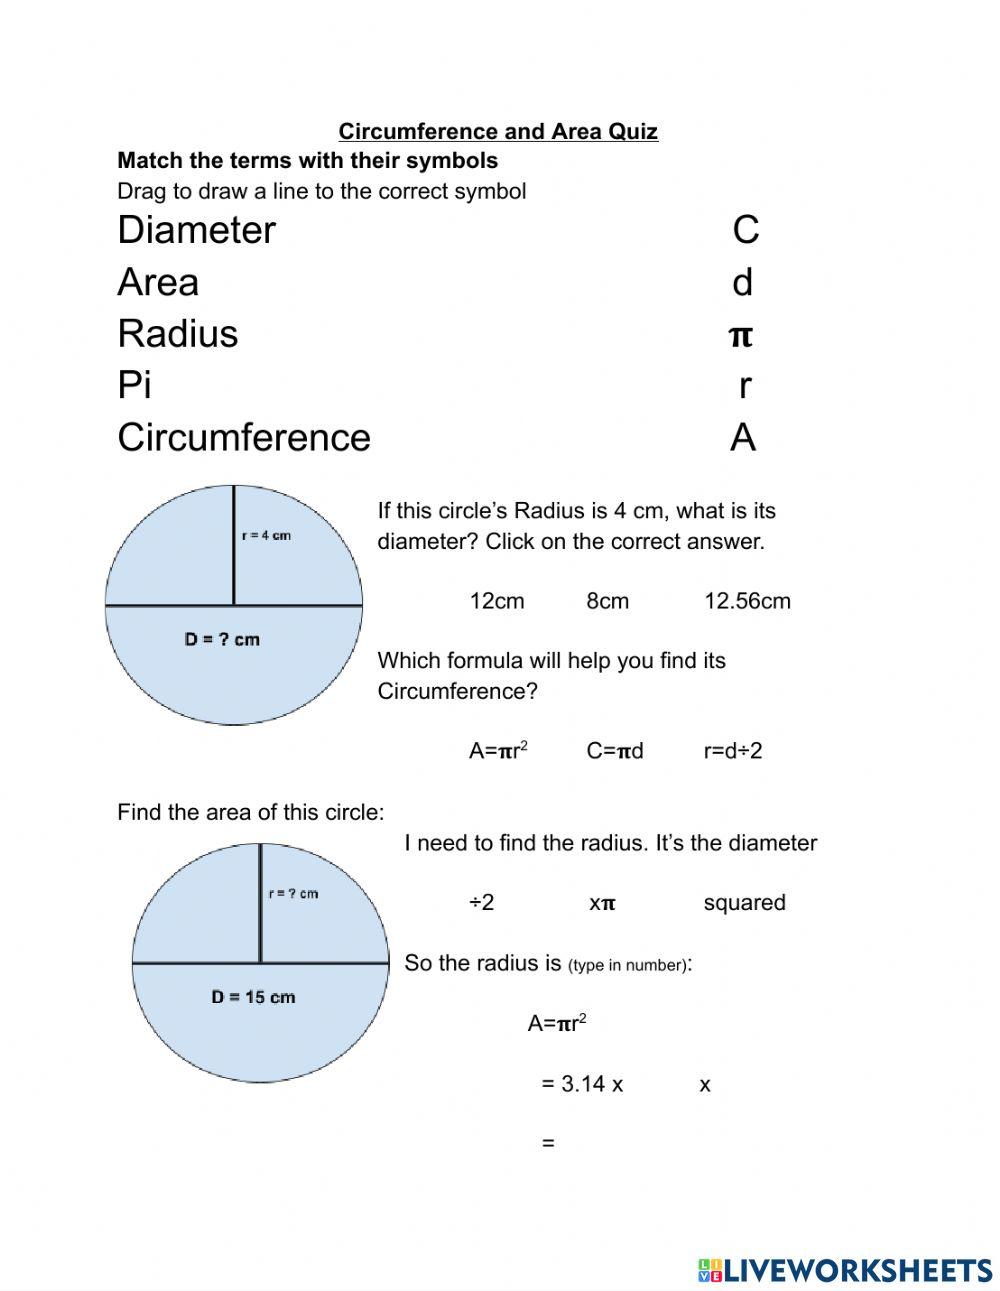 Circumference and Area Quiz